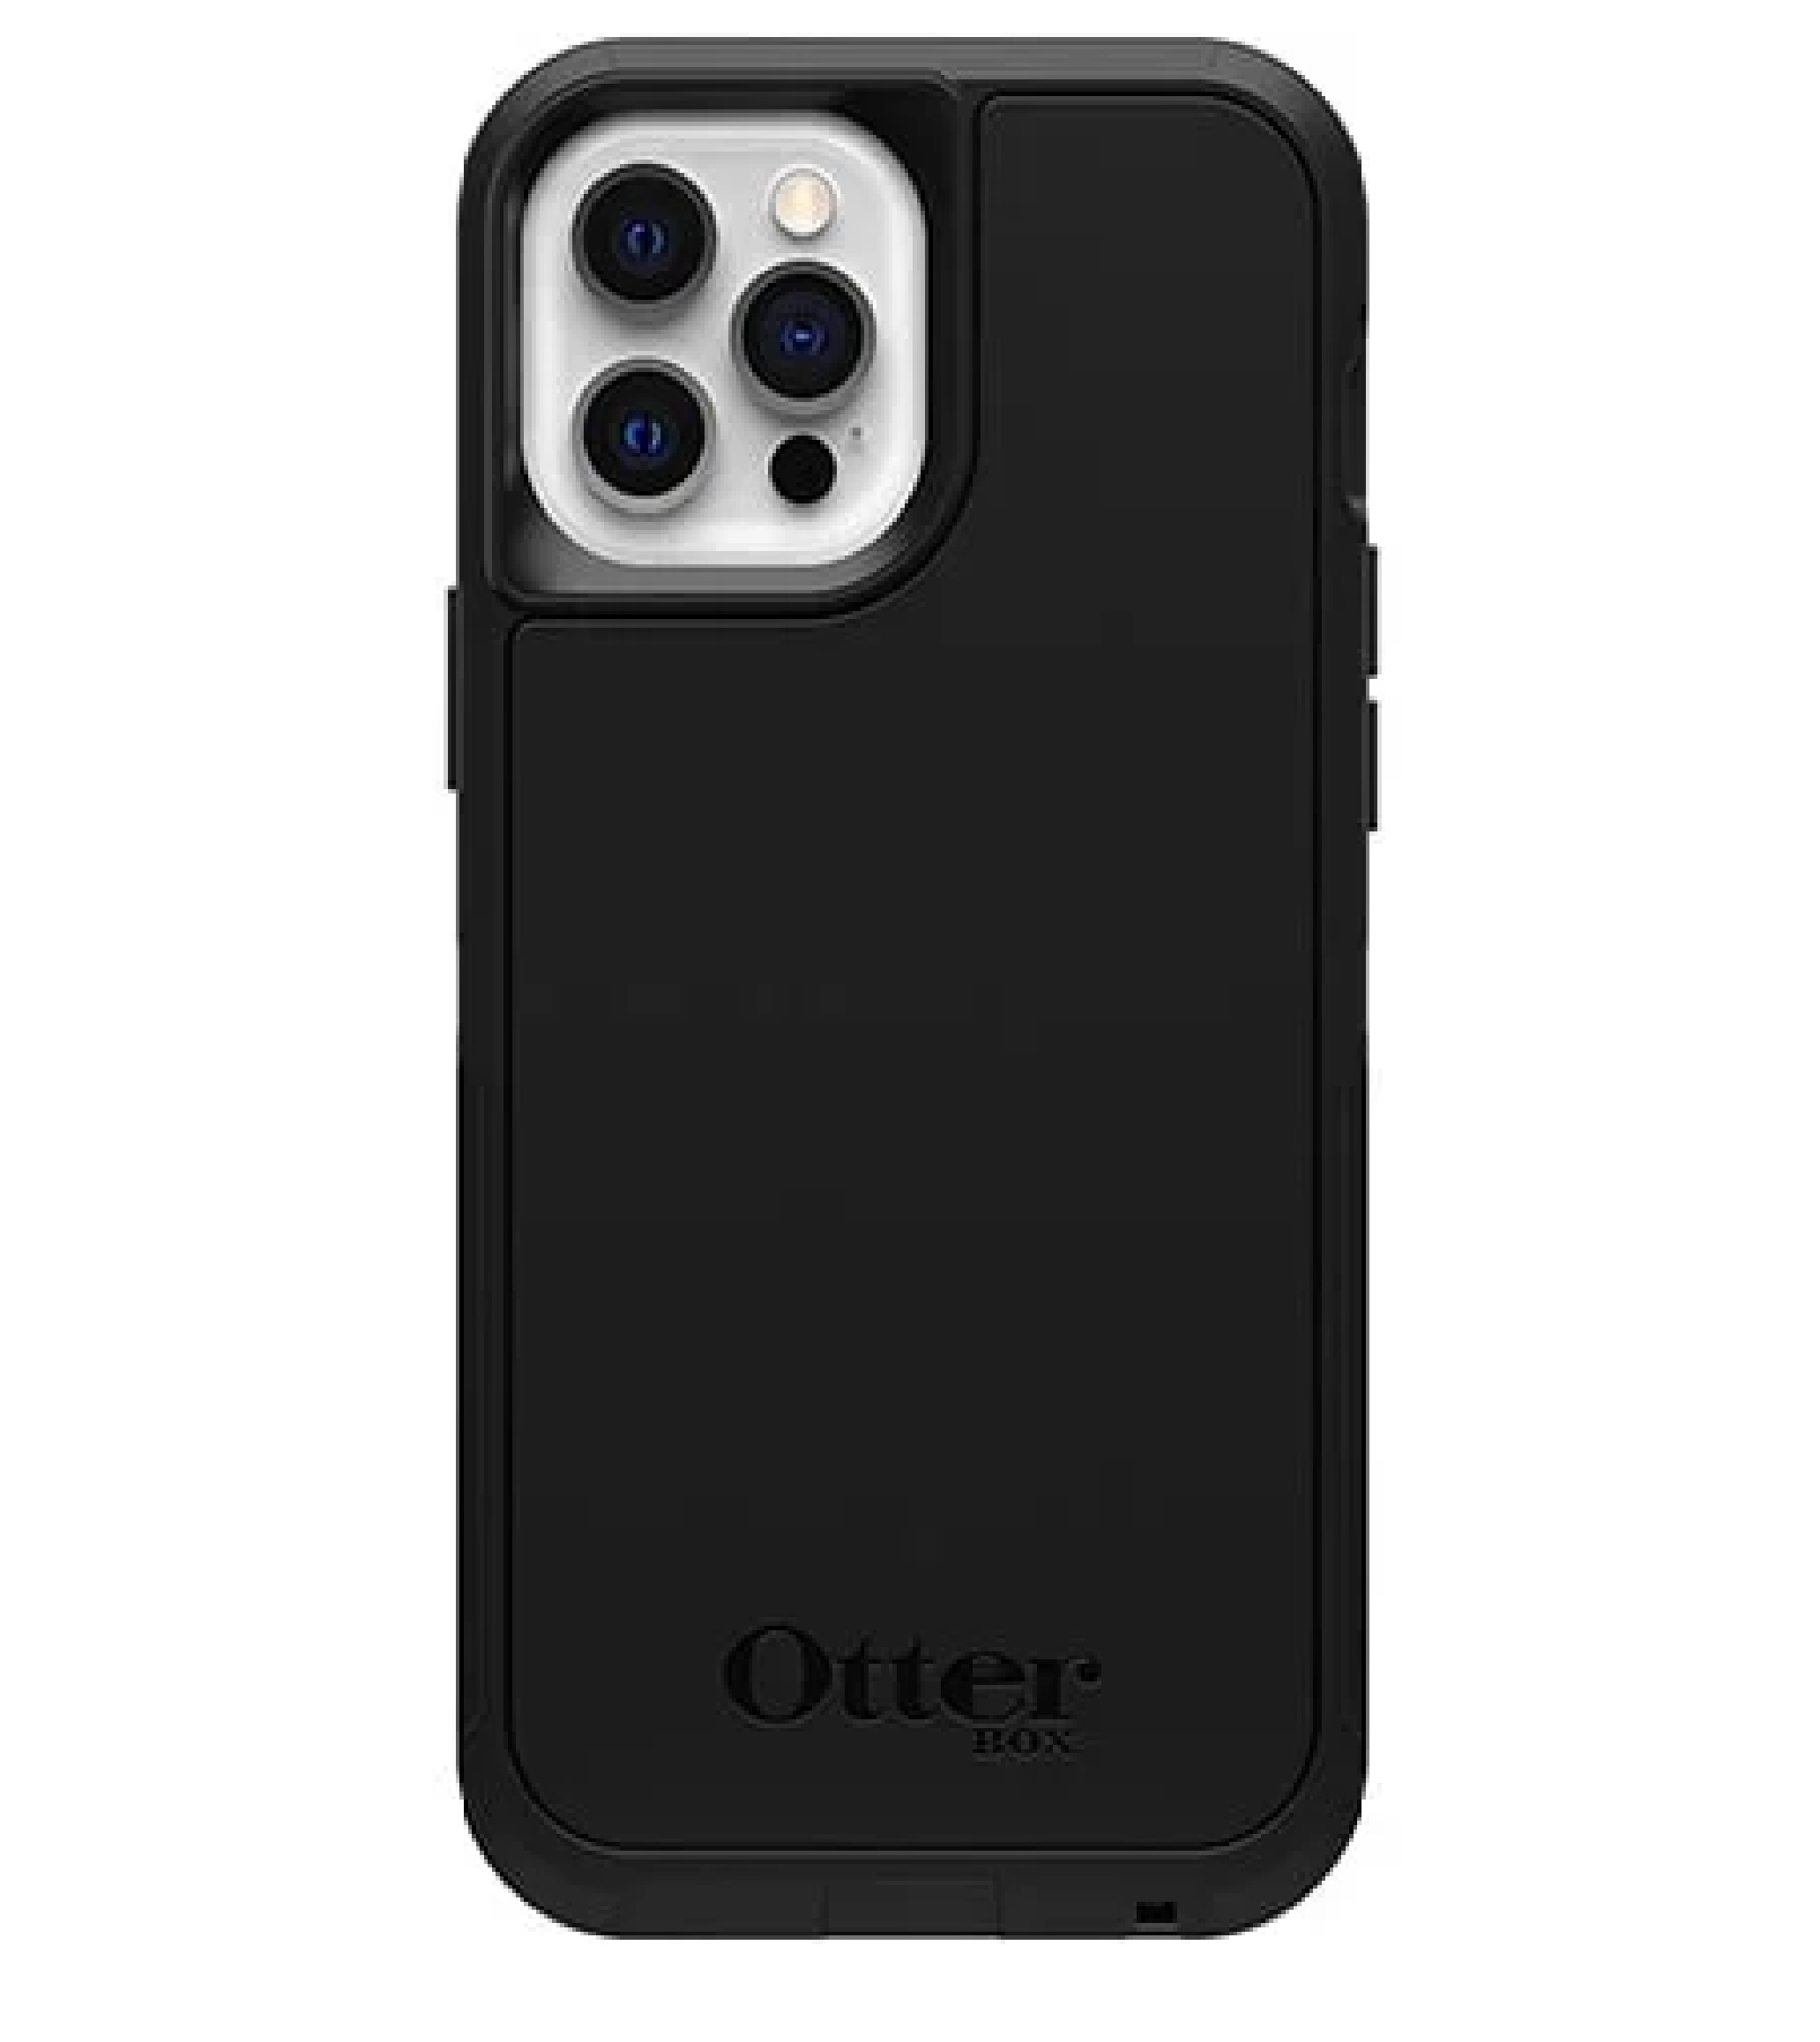 Otterbox Apple iPhone 12 Pro Max Symmetry Series+ Case with MagSafe - Black (77-80139), Wireless Charging Compatible, Ultra-Thin Design, Easy On/Off